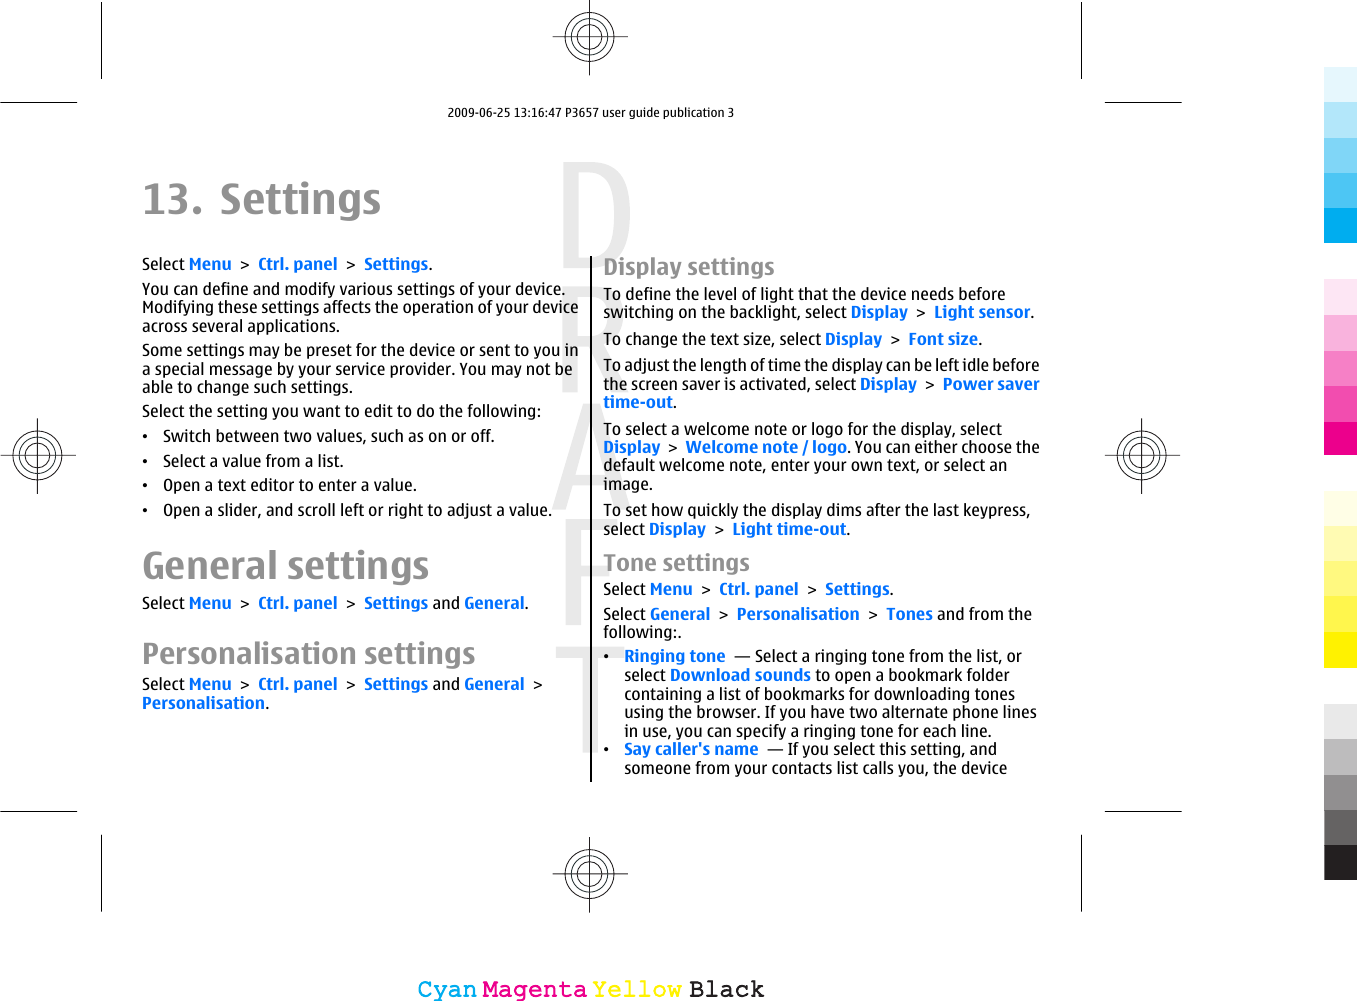 13. SettingsSelect Menu &gt; Ctrl. panel &gt; Settings.You can define and modify various settings of your device.Modifying these settings affects the operation of your deviceacross several applications.Some settings may be preset for the device or sent to you ina special message by your service provider. You may not beable to change such settings.Select the setting you want to edit to do the following:•Switch between two values, such as on or off.•Select a value from a list.•Open a text editor to enter a value.•Open a slider, and scroll left or right to adjust a value.General settingsSelect Menu &gt; Ctrl. panel &gt; Settings and General.Personalisation settingsSelect Menu &gt; Ctrl. panel &gt; Settings and General &gt;Personalisation.Display settingsTo define the level of light that the device needs beforeswitching on the backlight, select Display &gt; Light sensor.To change the text size, select Display &gt; Font size.To adjust the length of time the display can be left idle beforethe screen saver is activated, select Display &gt; Power savertime-out.To select a welcome note or logo for the display, selectDisplay &gt; Welcome note / logo. You can either choose thedefault welcome note, enter your own text, or select animage.To set how quickly the display dims after the last keypress,select Display &gt; Light time-out.Tone settingsSelect Menu &gt; Ctrl. panel &gt; Settings.Select General &gt; Personalisation &gt; Tones and from thefollowing:.•Ringing tone  — Select a ringing tone from the list, orselect Download sounds to open a bookmark foldercontaining a list of bookmarks for downloading tonesusing the browser. If you have two alternate phone linesin use, you can specify a ringing tone for each line.•Say caller&apos;s name  — If you select this setting, andsomeone from your contacts list calls you, the deviceCyanCyanMagentaMagentaYellowYellowBlackBlack2009-06-25 13:16:47 P3657 user guide publication 3